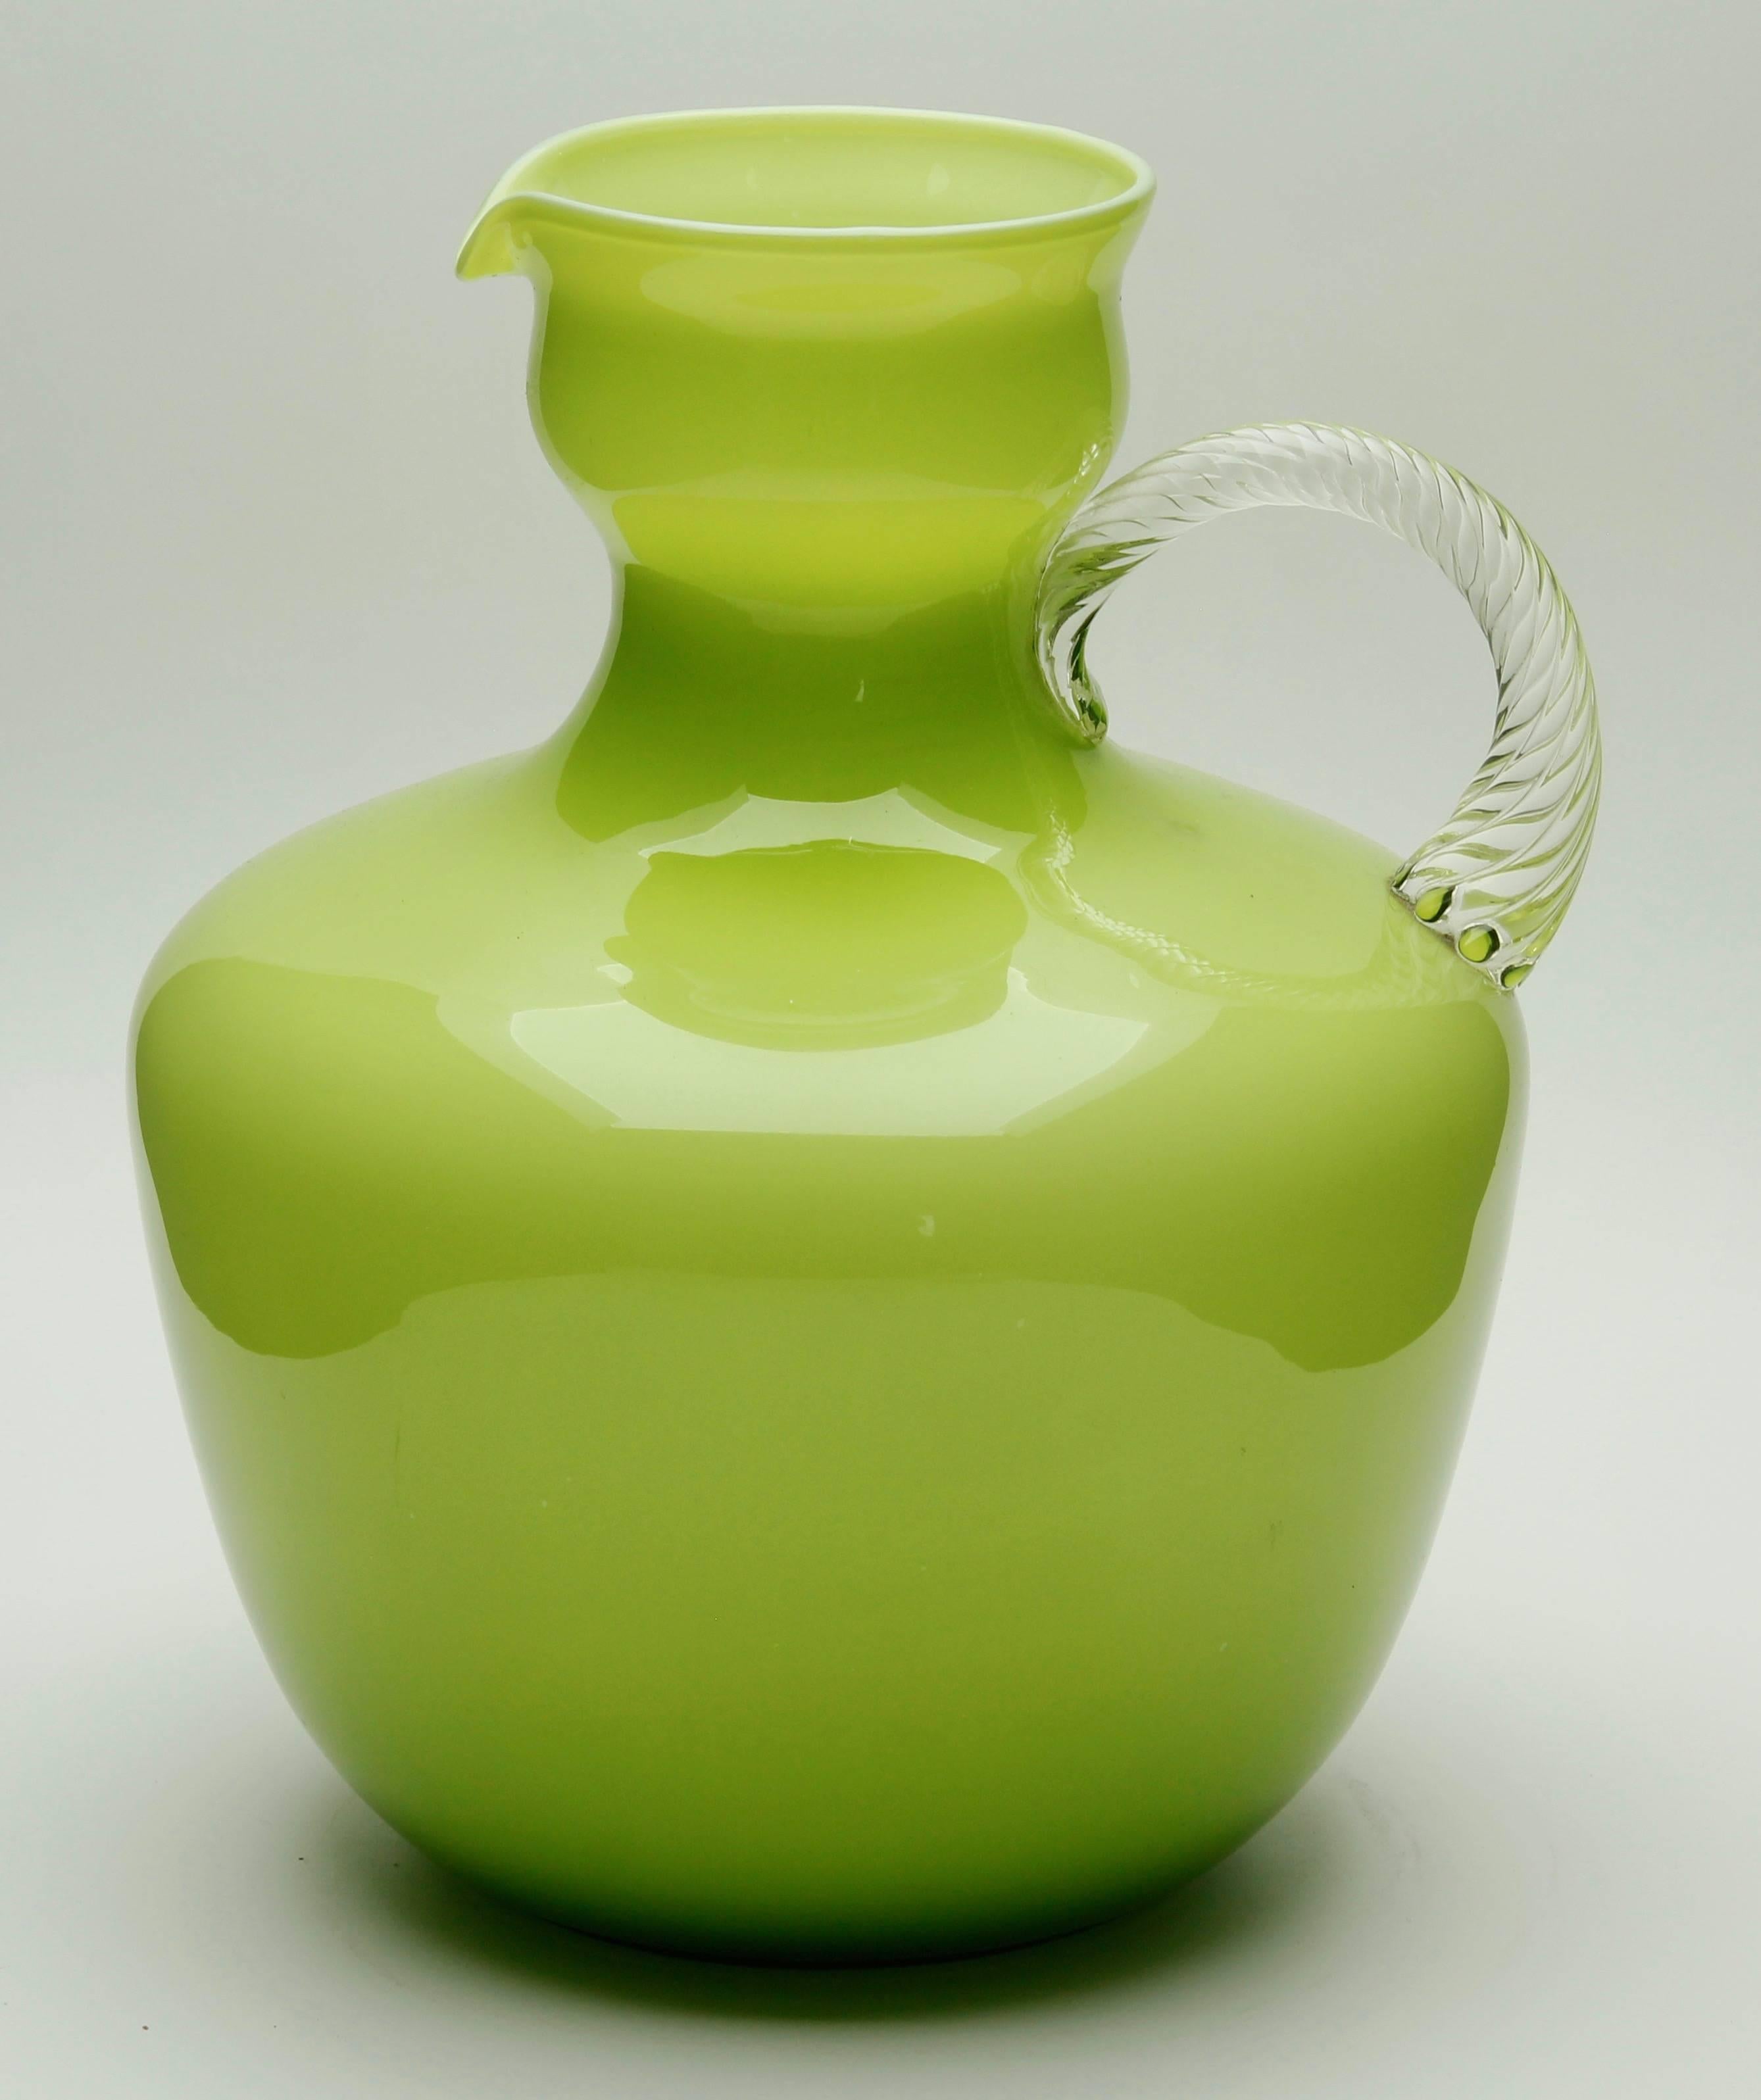 Vintage Italian Empoli olive green Murano cased art glass pitcher

Hand blown cased glass pitcher with twisted handle made in the mid-1955s by the Italian firm Empoli. Irresistibly chic olive green glass encased in clear glass set off by a clear